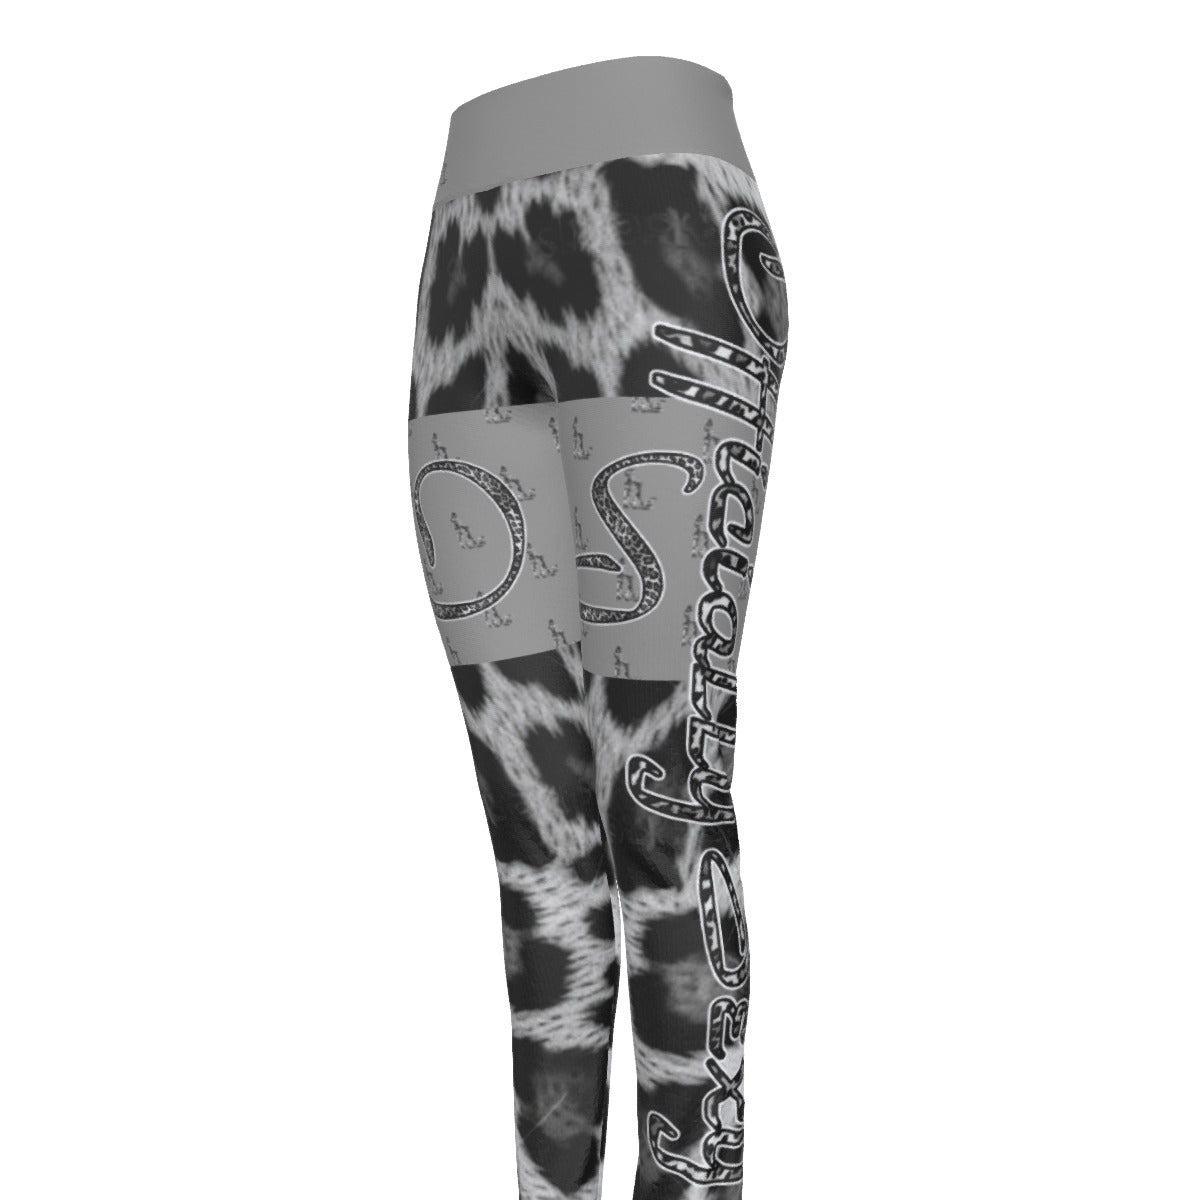 Officially Sexy Snow Leopard Print Collection Women's Grey High Waist Thigh High Booty Popper Leggings #2 (English) 4